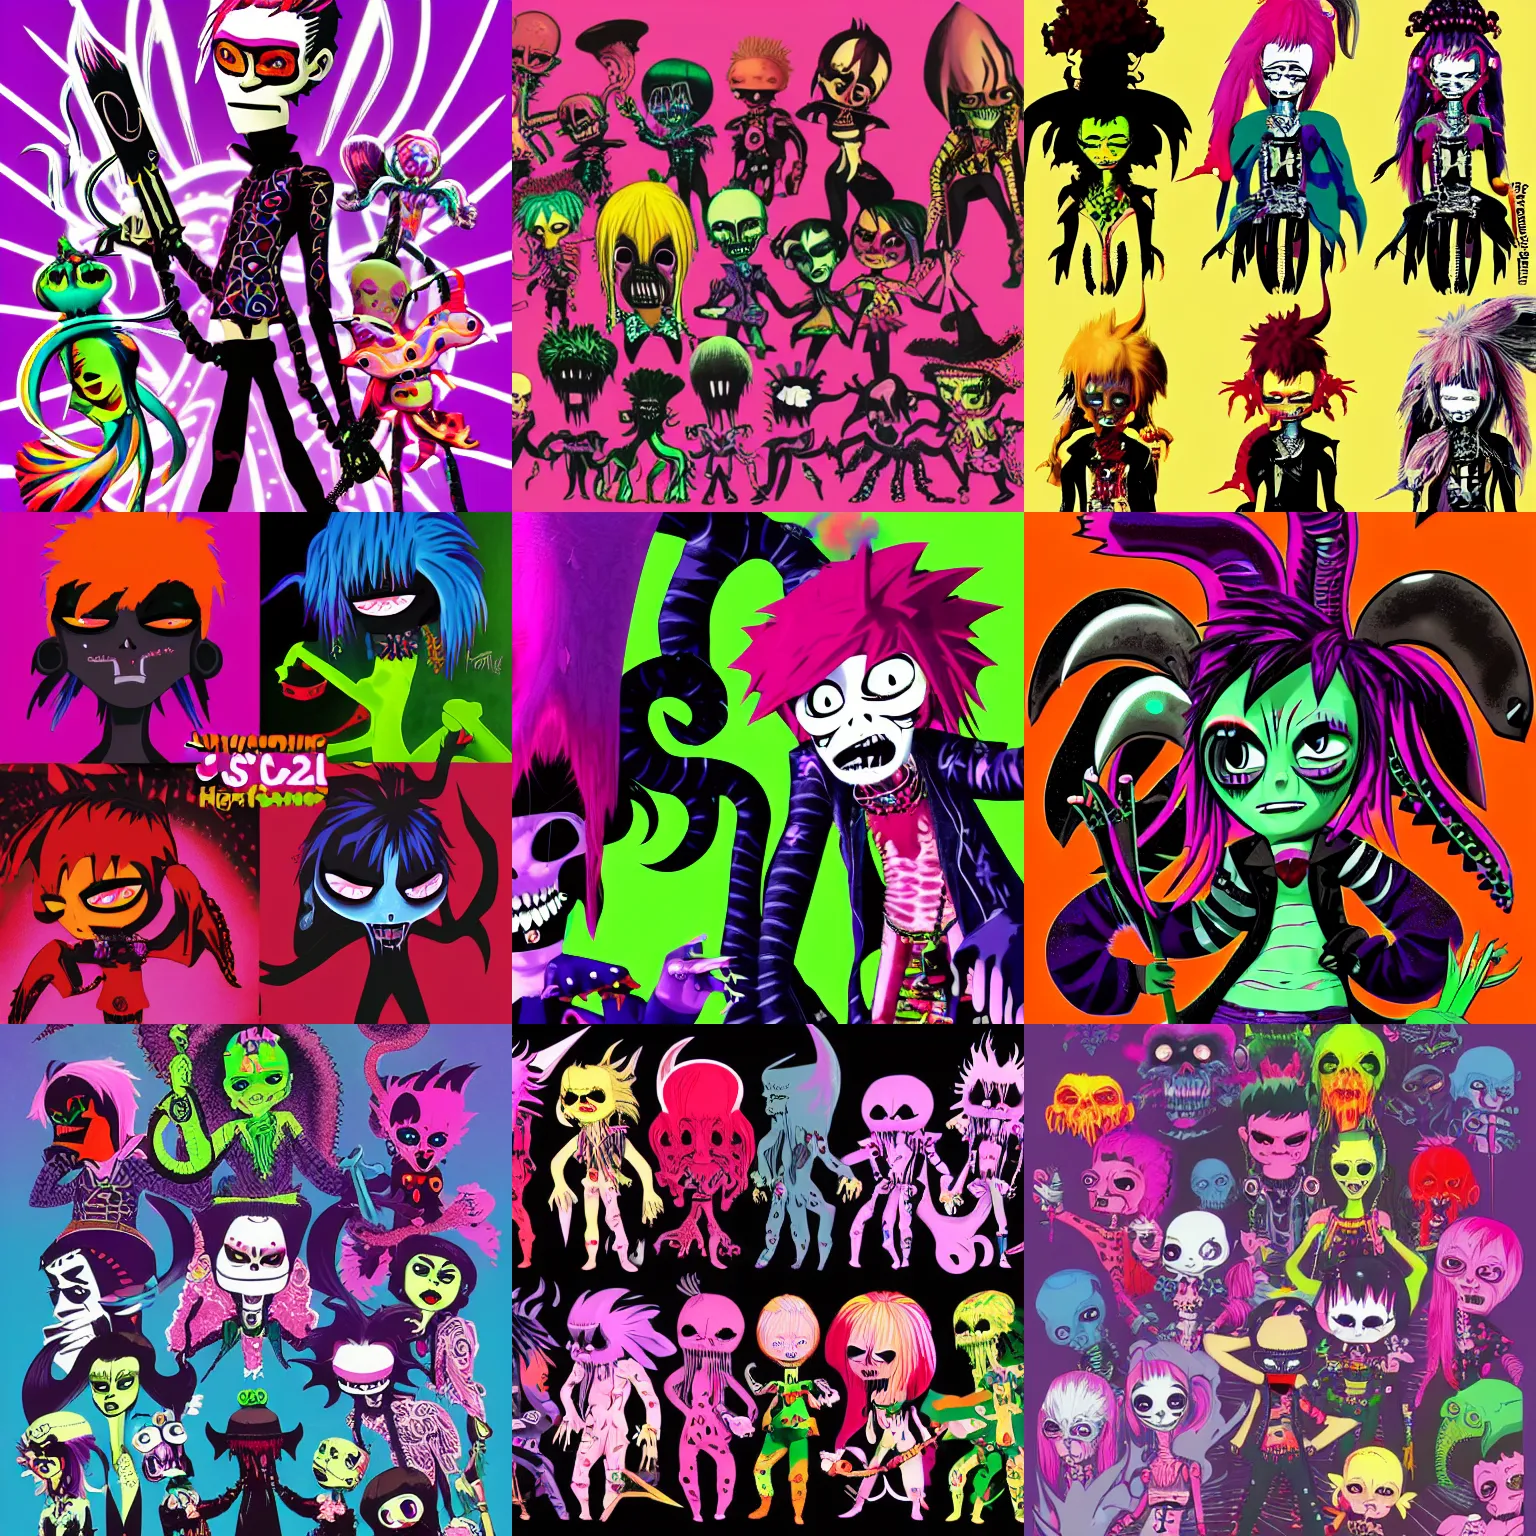 Prompt: CGI lisa frank gothic punk vampiric electrifying vampiric squid character designs of varying shapes and sizes by Jamie Hewlett from gorillaz high resolution, rtx